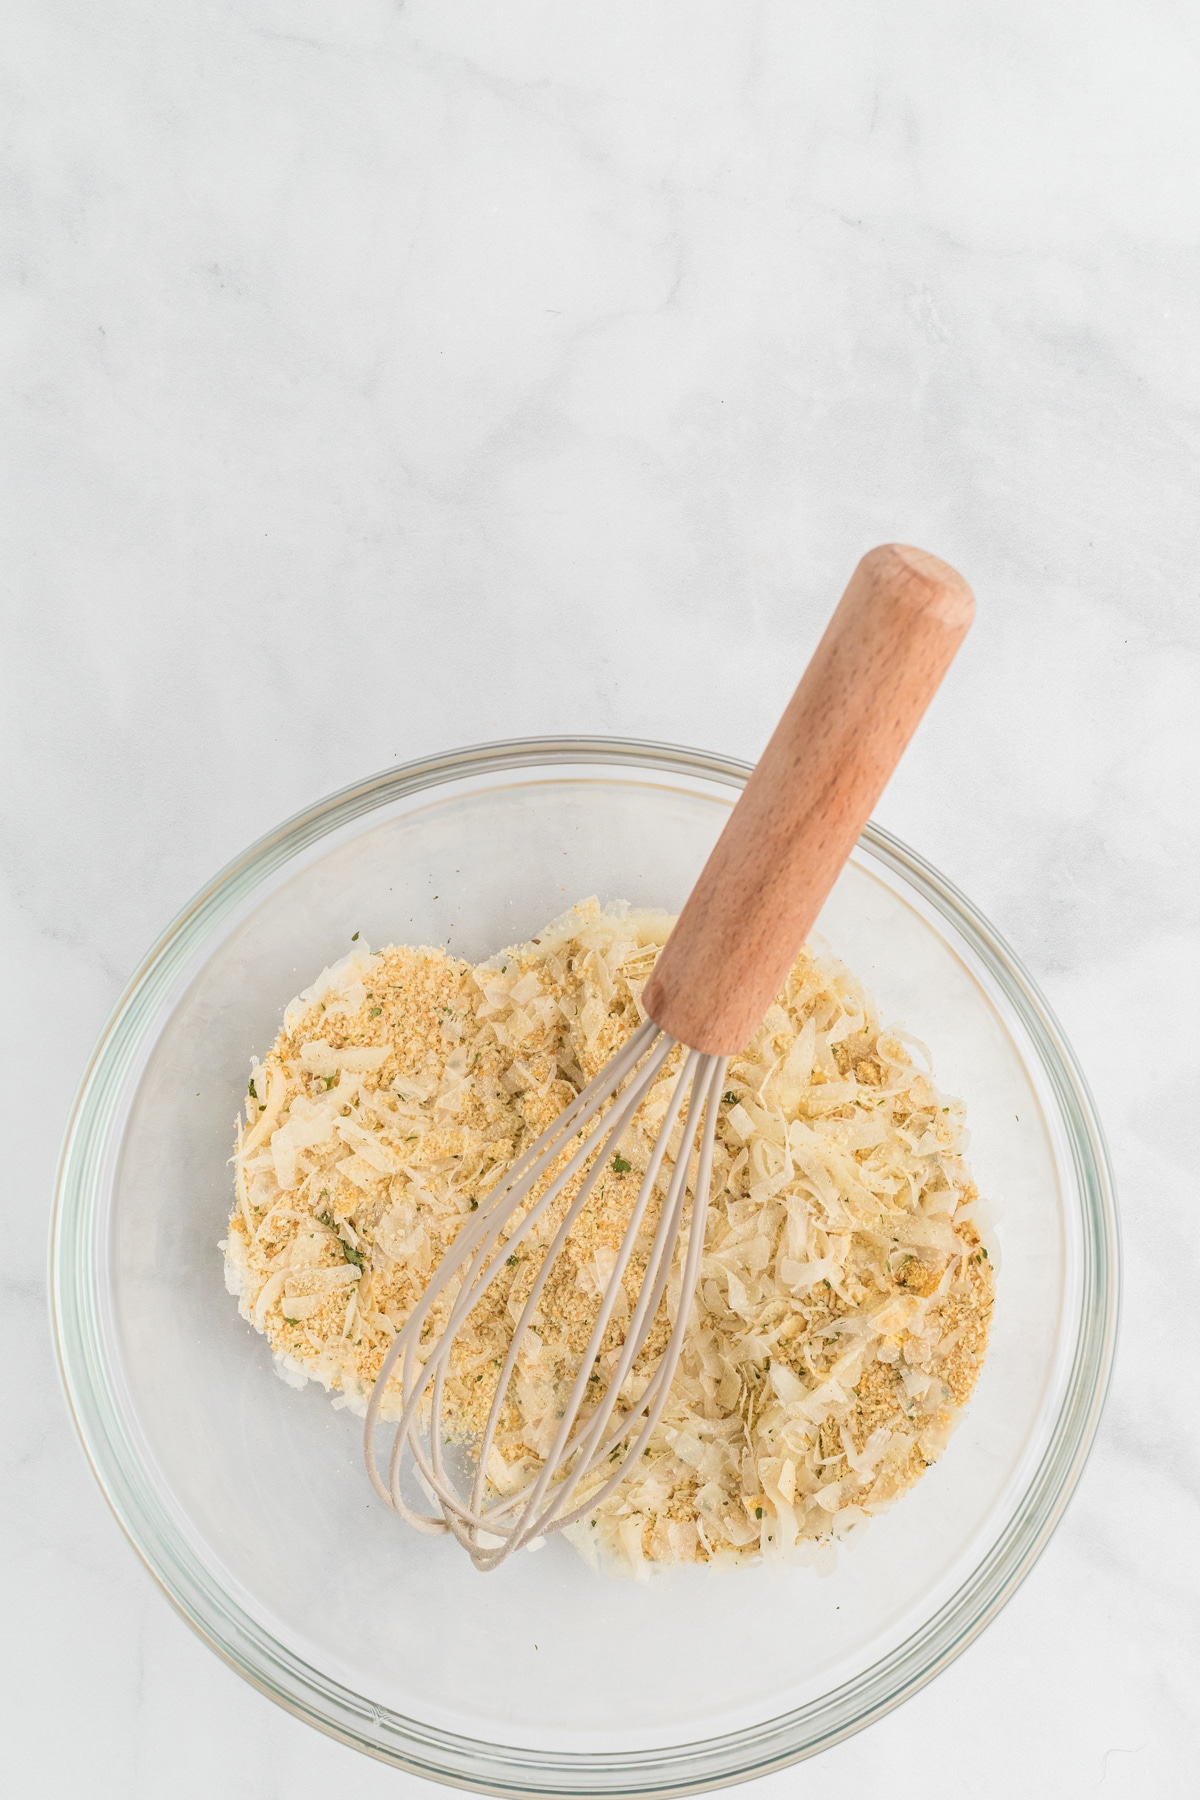 Breadcrumbs, cheese, and seasonings whisked together in a bowl